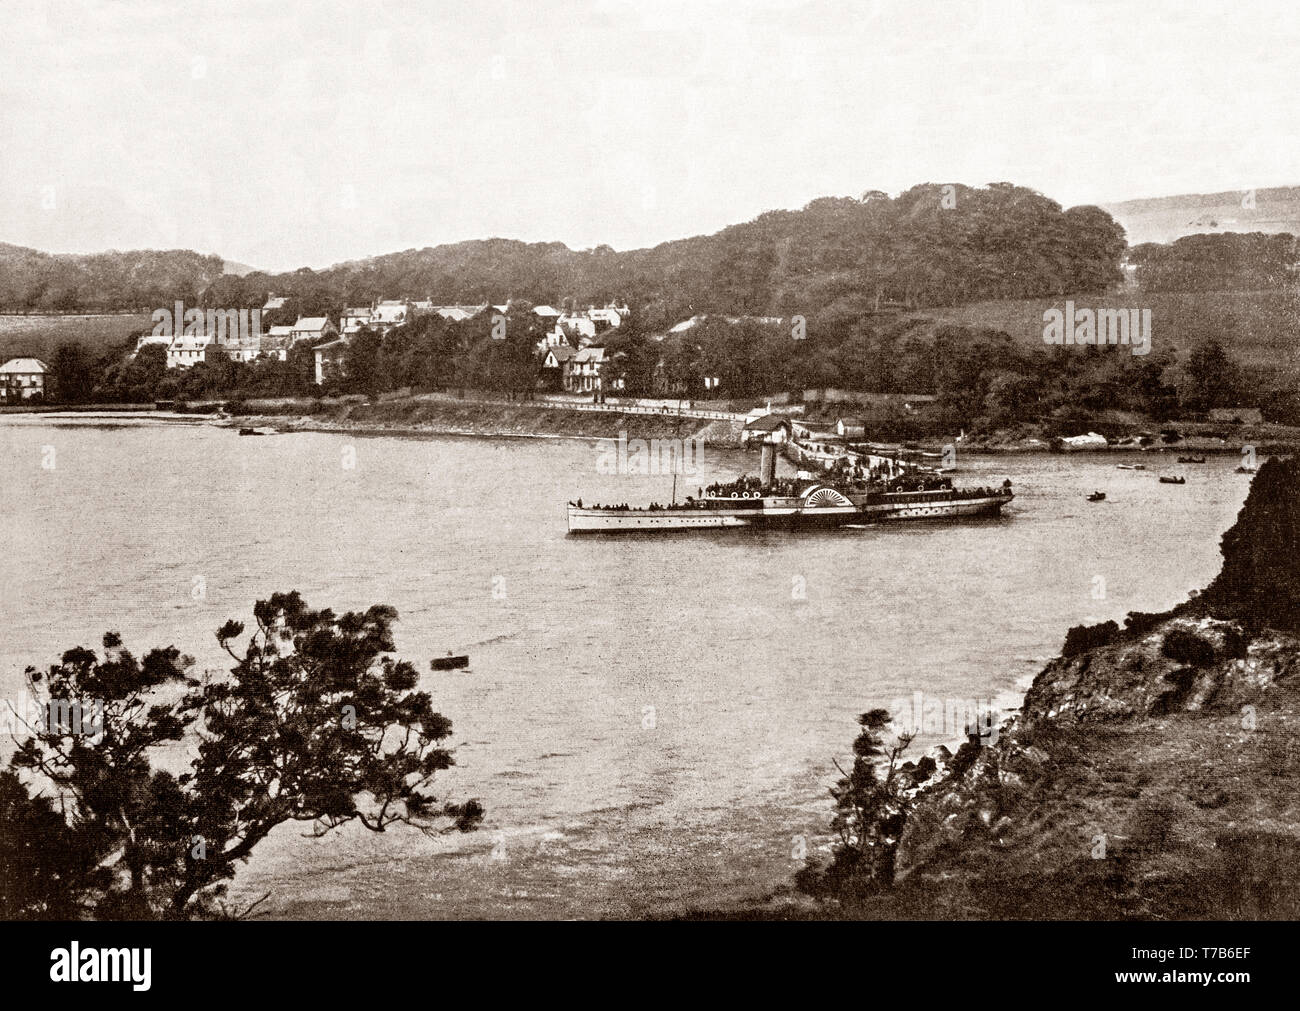 A late 19th Century view of the paddle steamer ferry 'Tantallon Castle' leaving the pier at Aberdour, a scenic and historic village on the north shore of the Firth of Forth, Fife, Scotland.  The town's harbour was improved by the addition of a stone pier to help handle the coal traffic from nearby collieries, however, during the mid-19th Century traffic changed dramatically, and Aberdour Harbour became a popular destination for pleasure steamers from Leith. Stock Photo